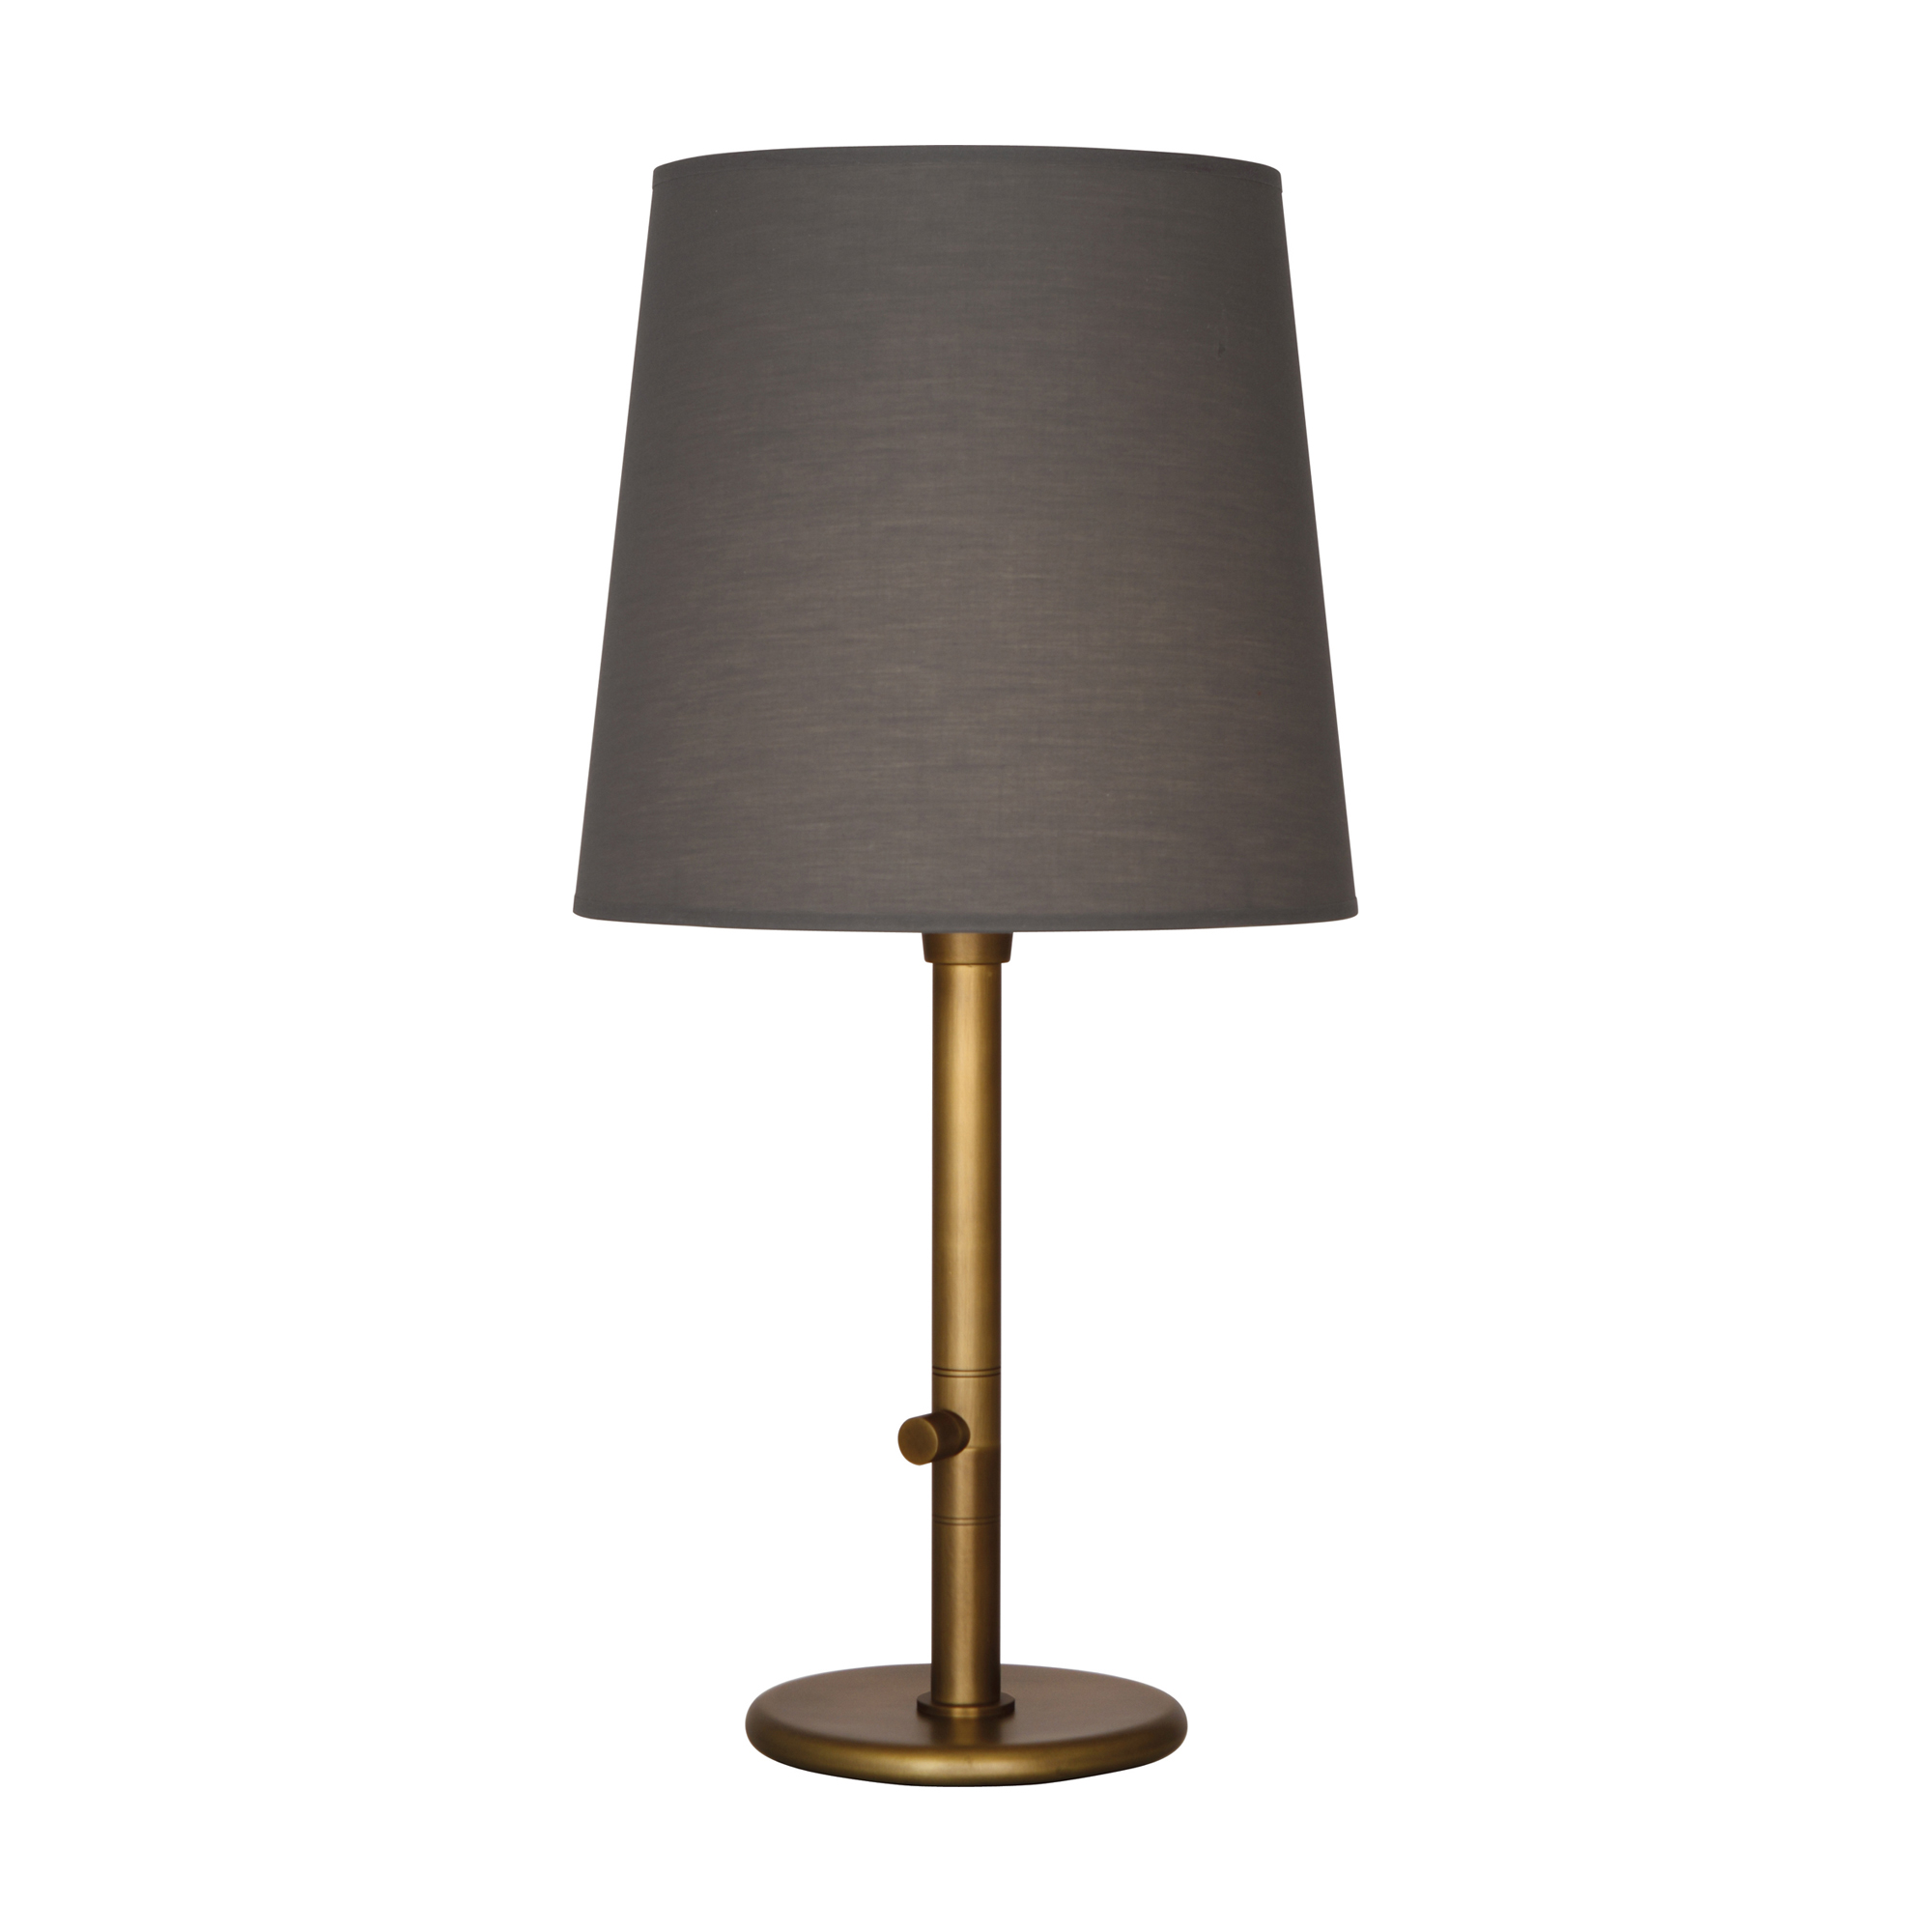 Rico Espinet Buster Chica Accent Lamp Style #2803